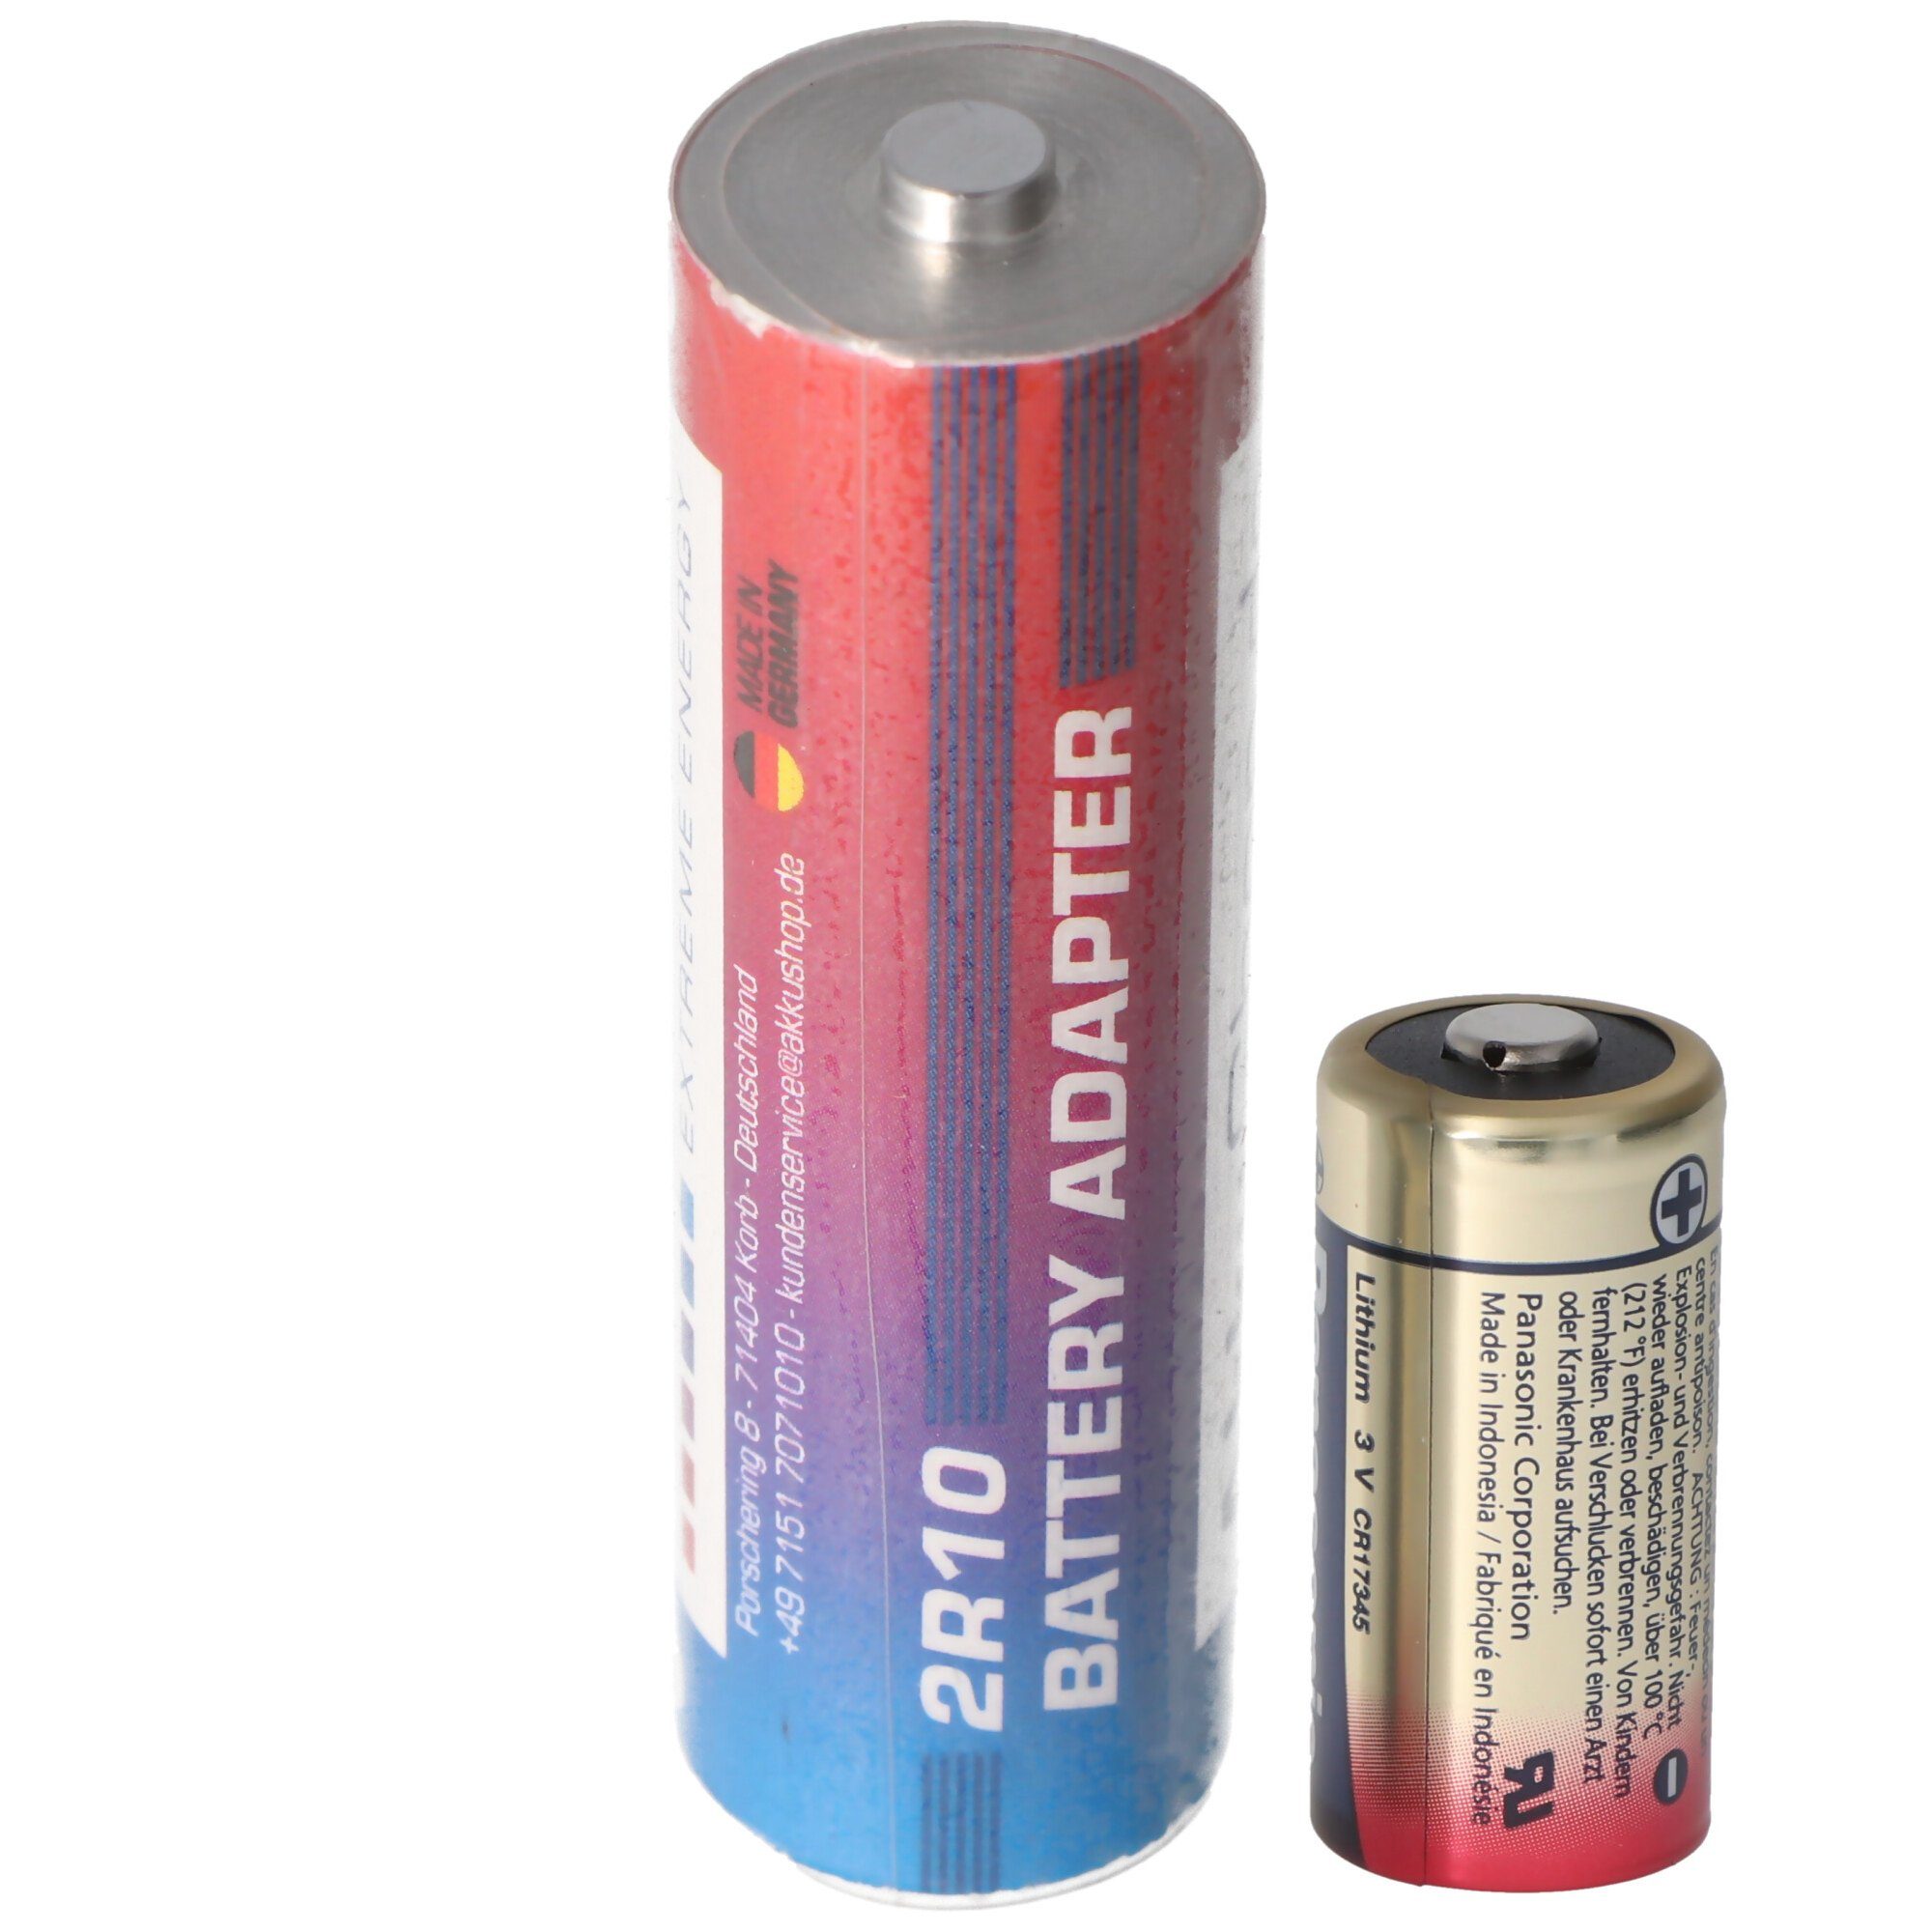 2R10R, 2R10 3,0 Vo Duplex 2010, Batterie Adapter Batterie Stab-Batterie, 3010, AccuCell